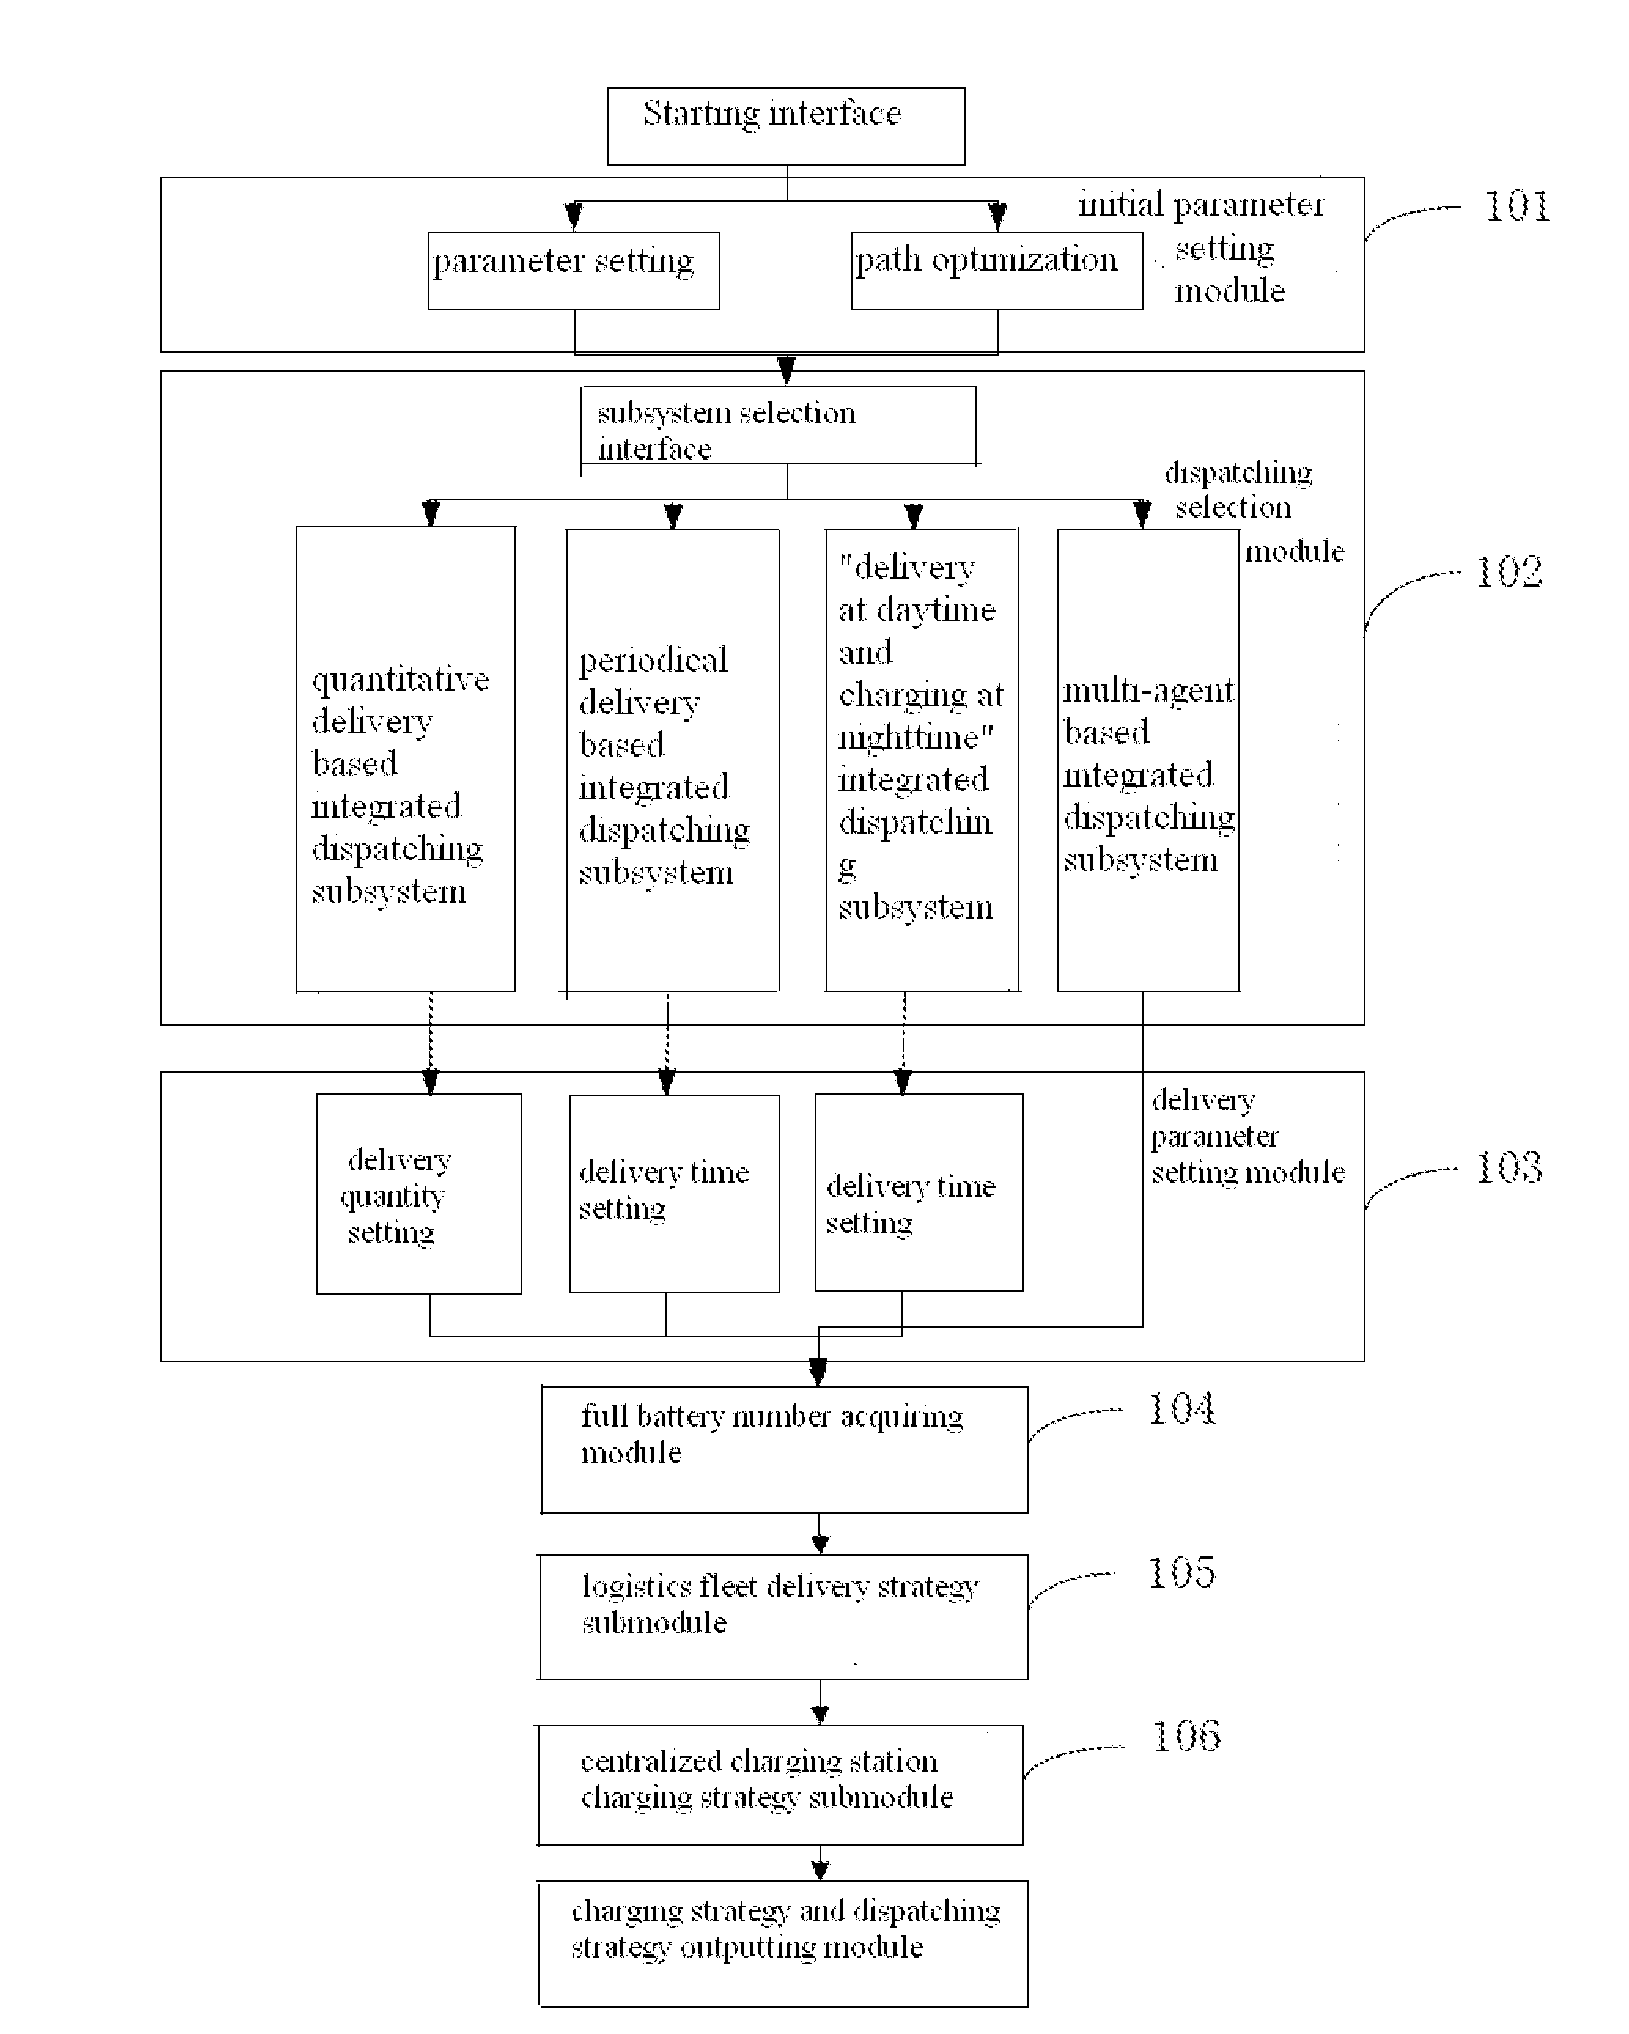 Integrated battery dispatching system with centralized charging and centralized allocation